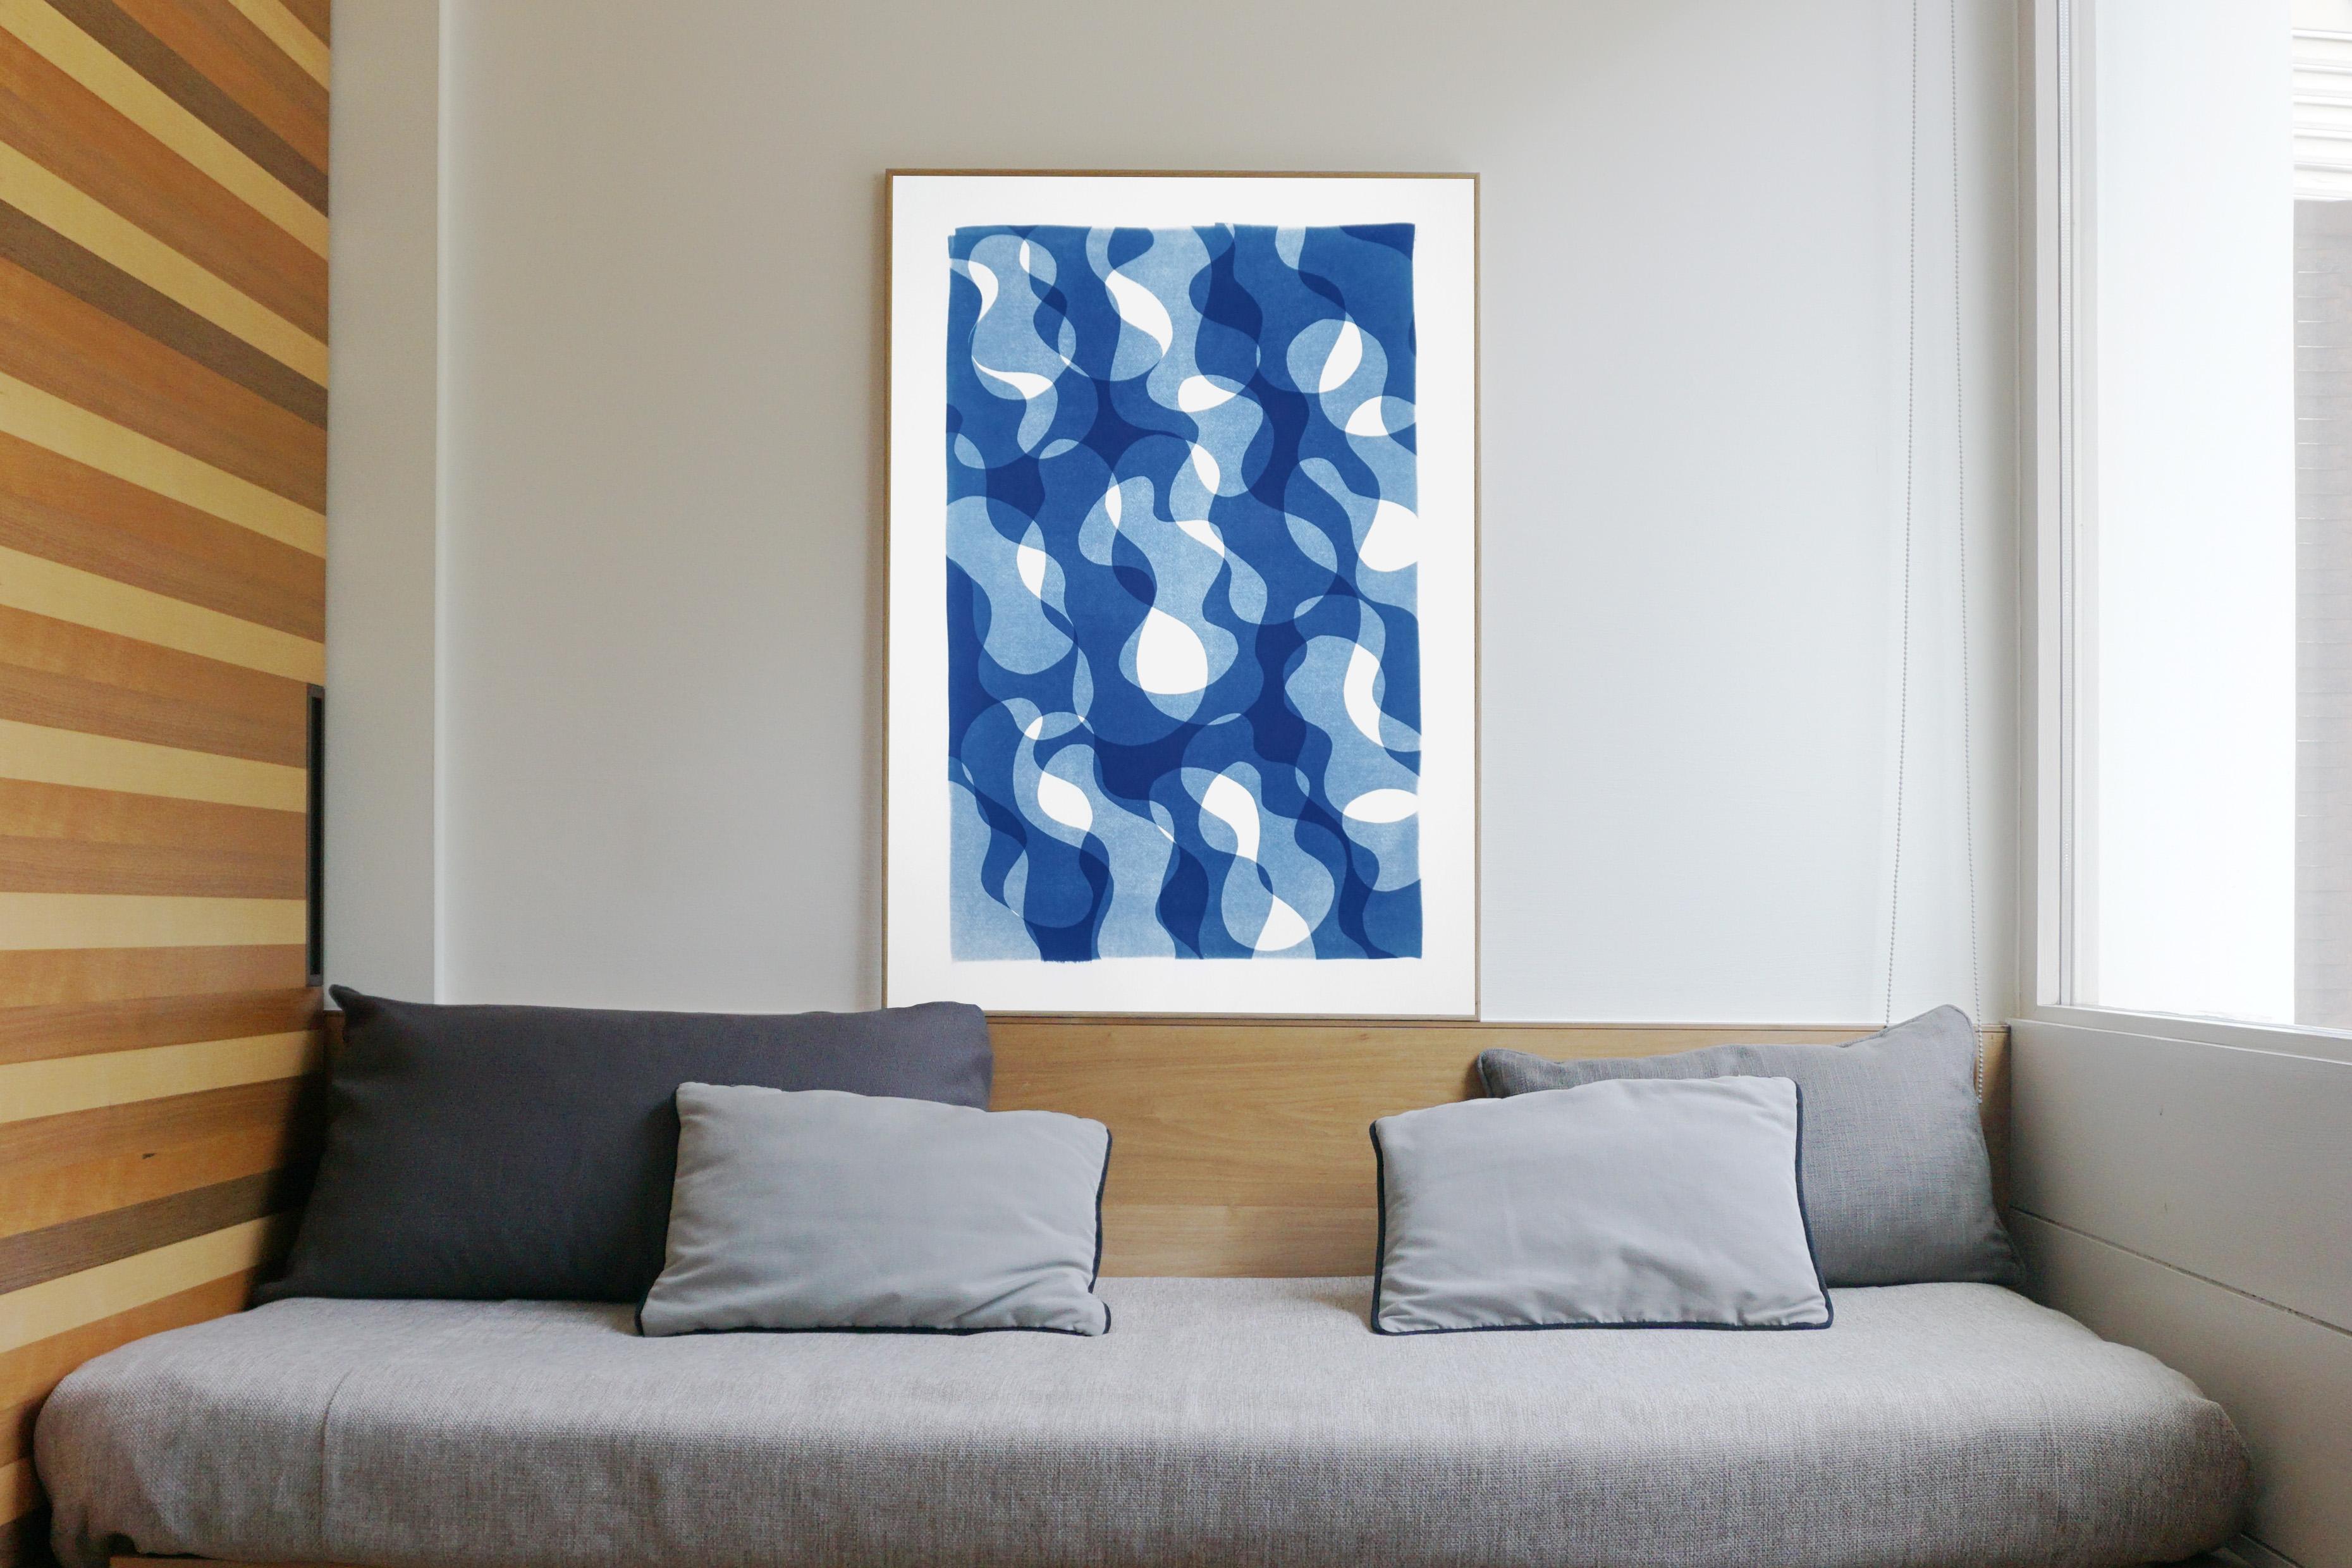 Abstract Print of Geometric Water Movement in Blue Tones, Memphis Shapes Style 1